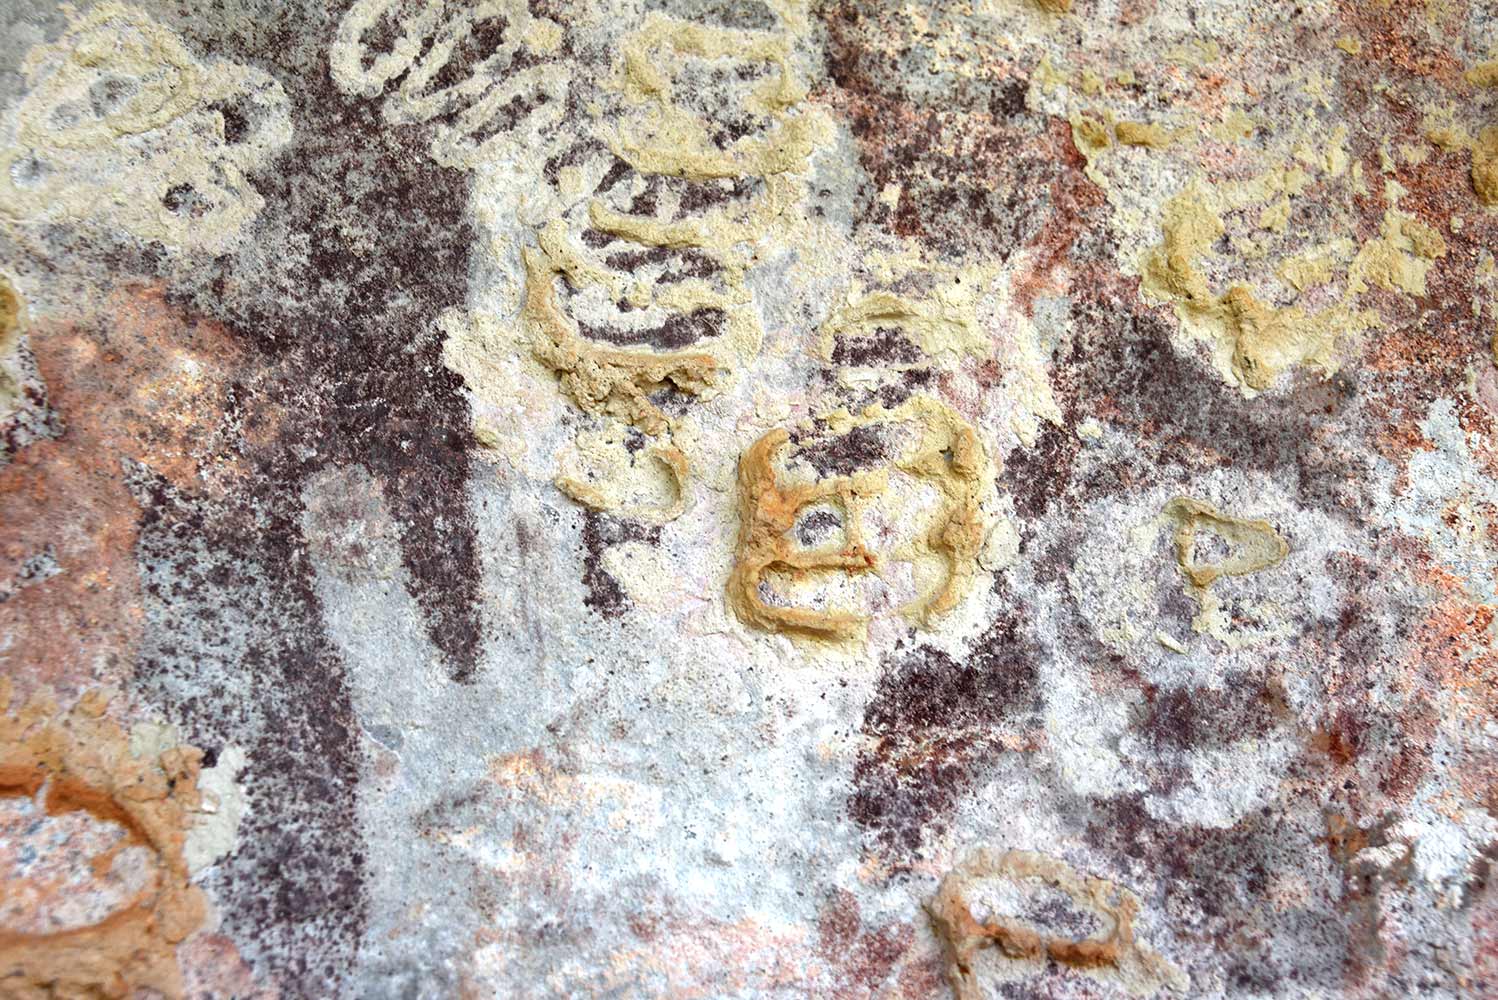 Rock art image with wasp nests built over it